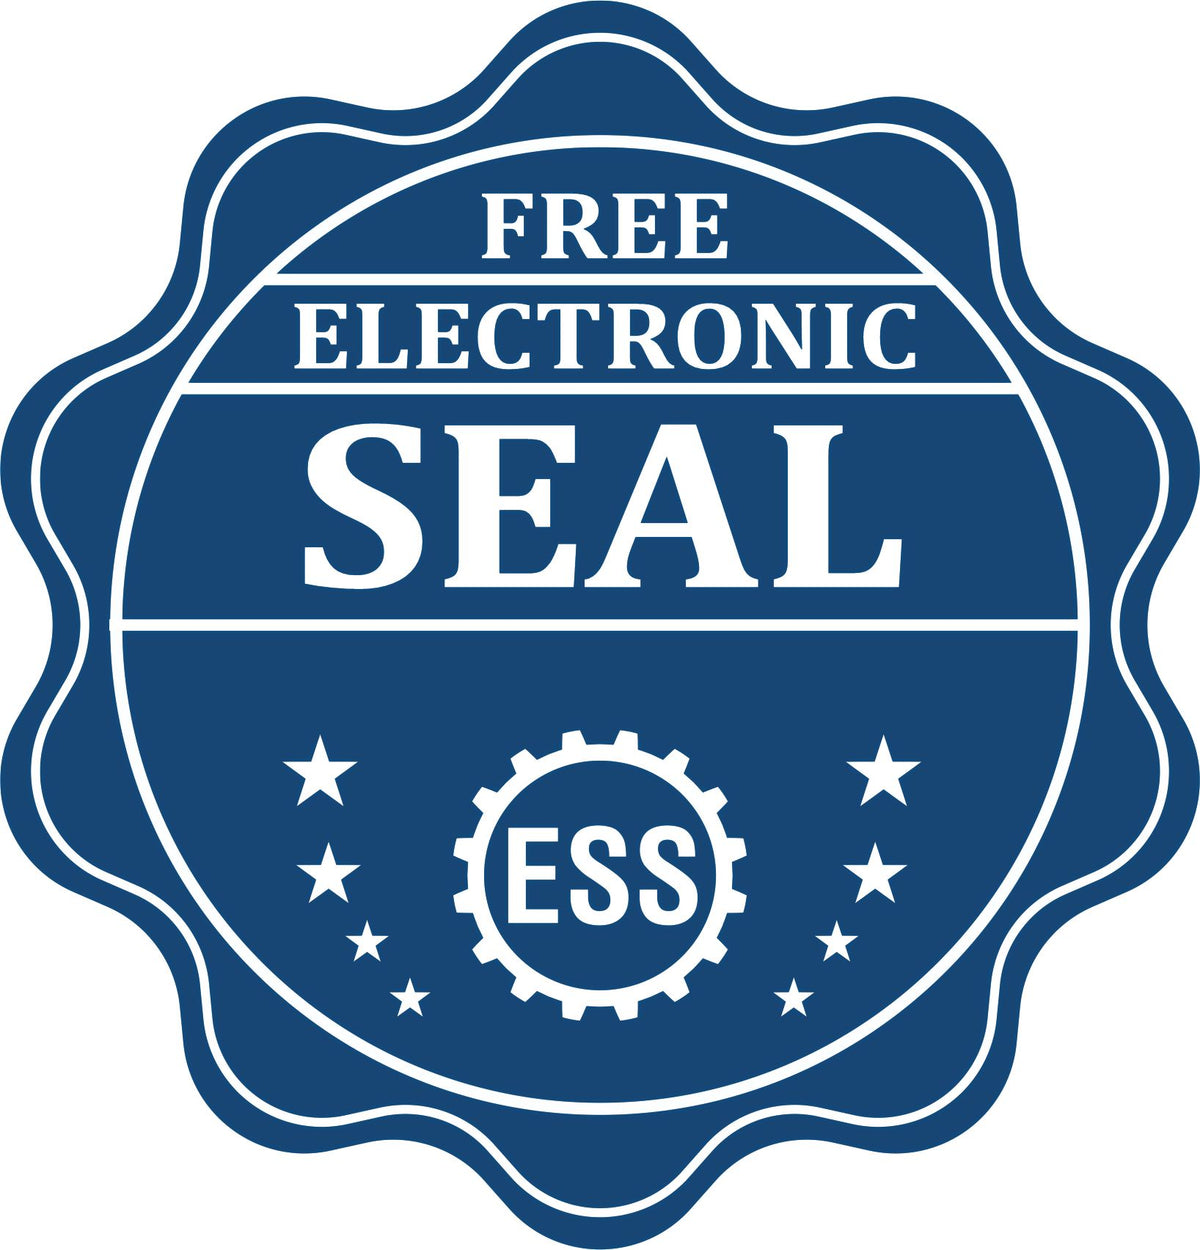 A badge showing a free electronic seal for the Self-Inking New Mexico Landscape Architect Stamp with stars and the ESS gear on the emblem.